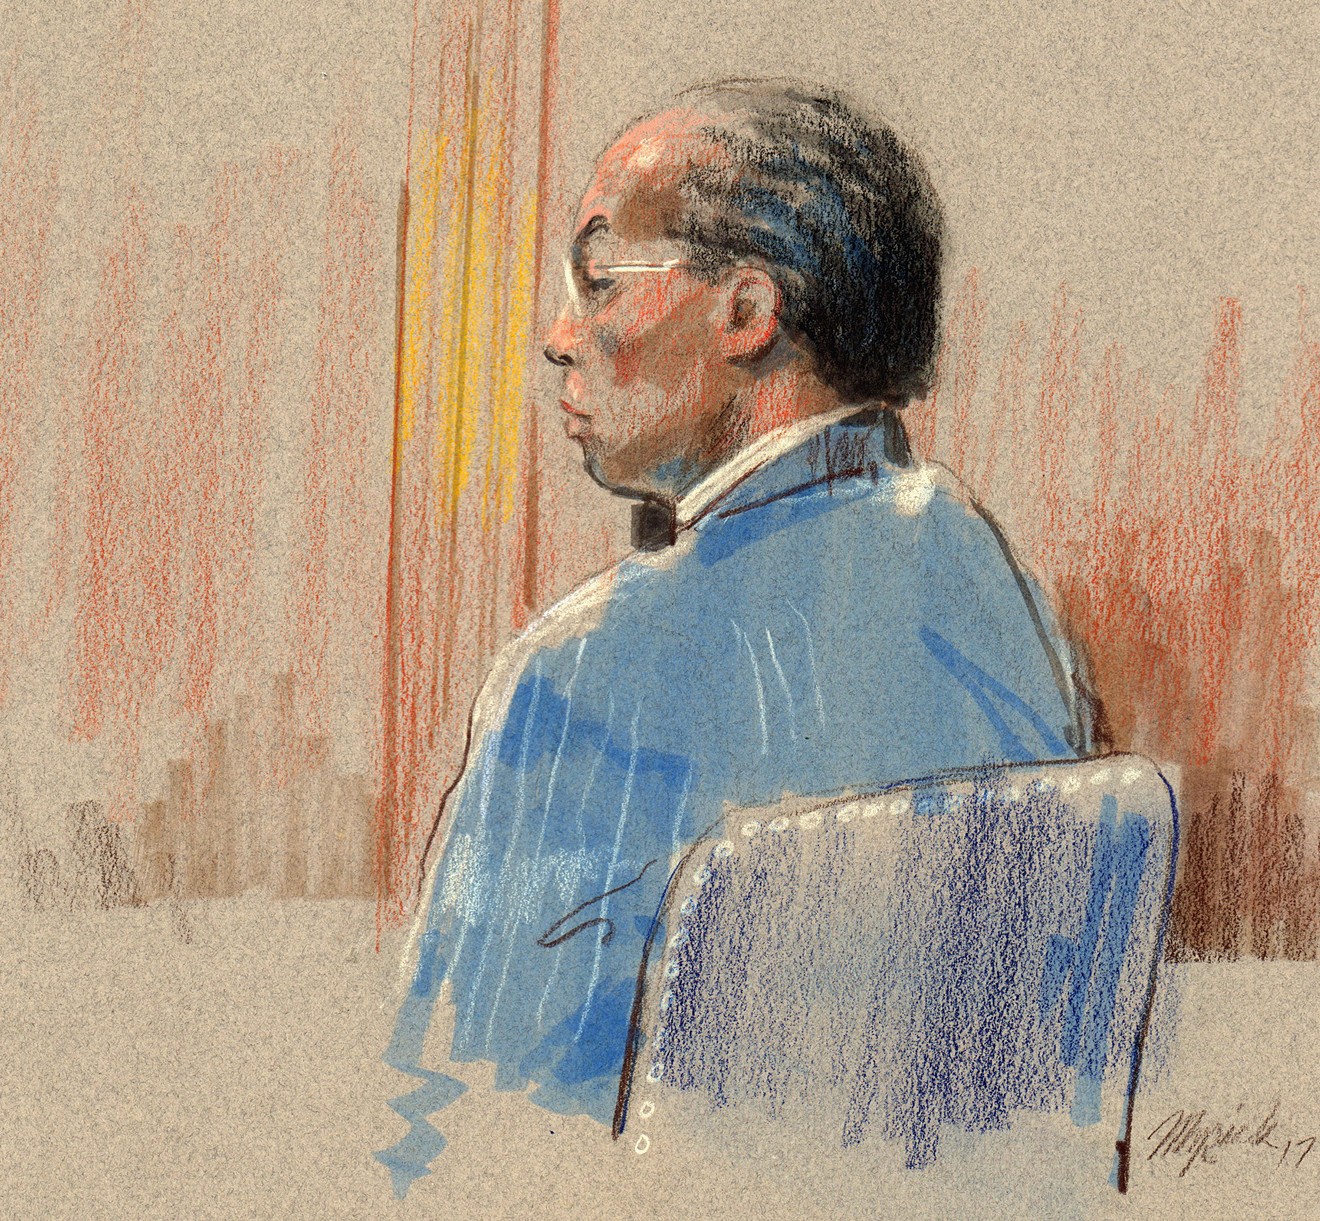 John Wiley Price on trial in Dallas